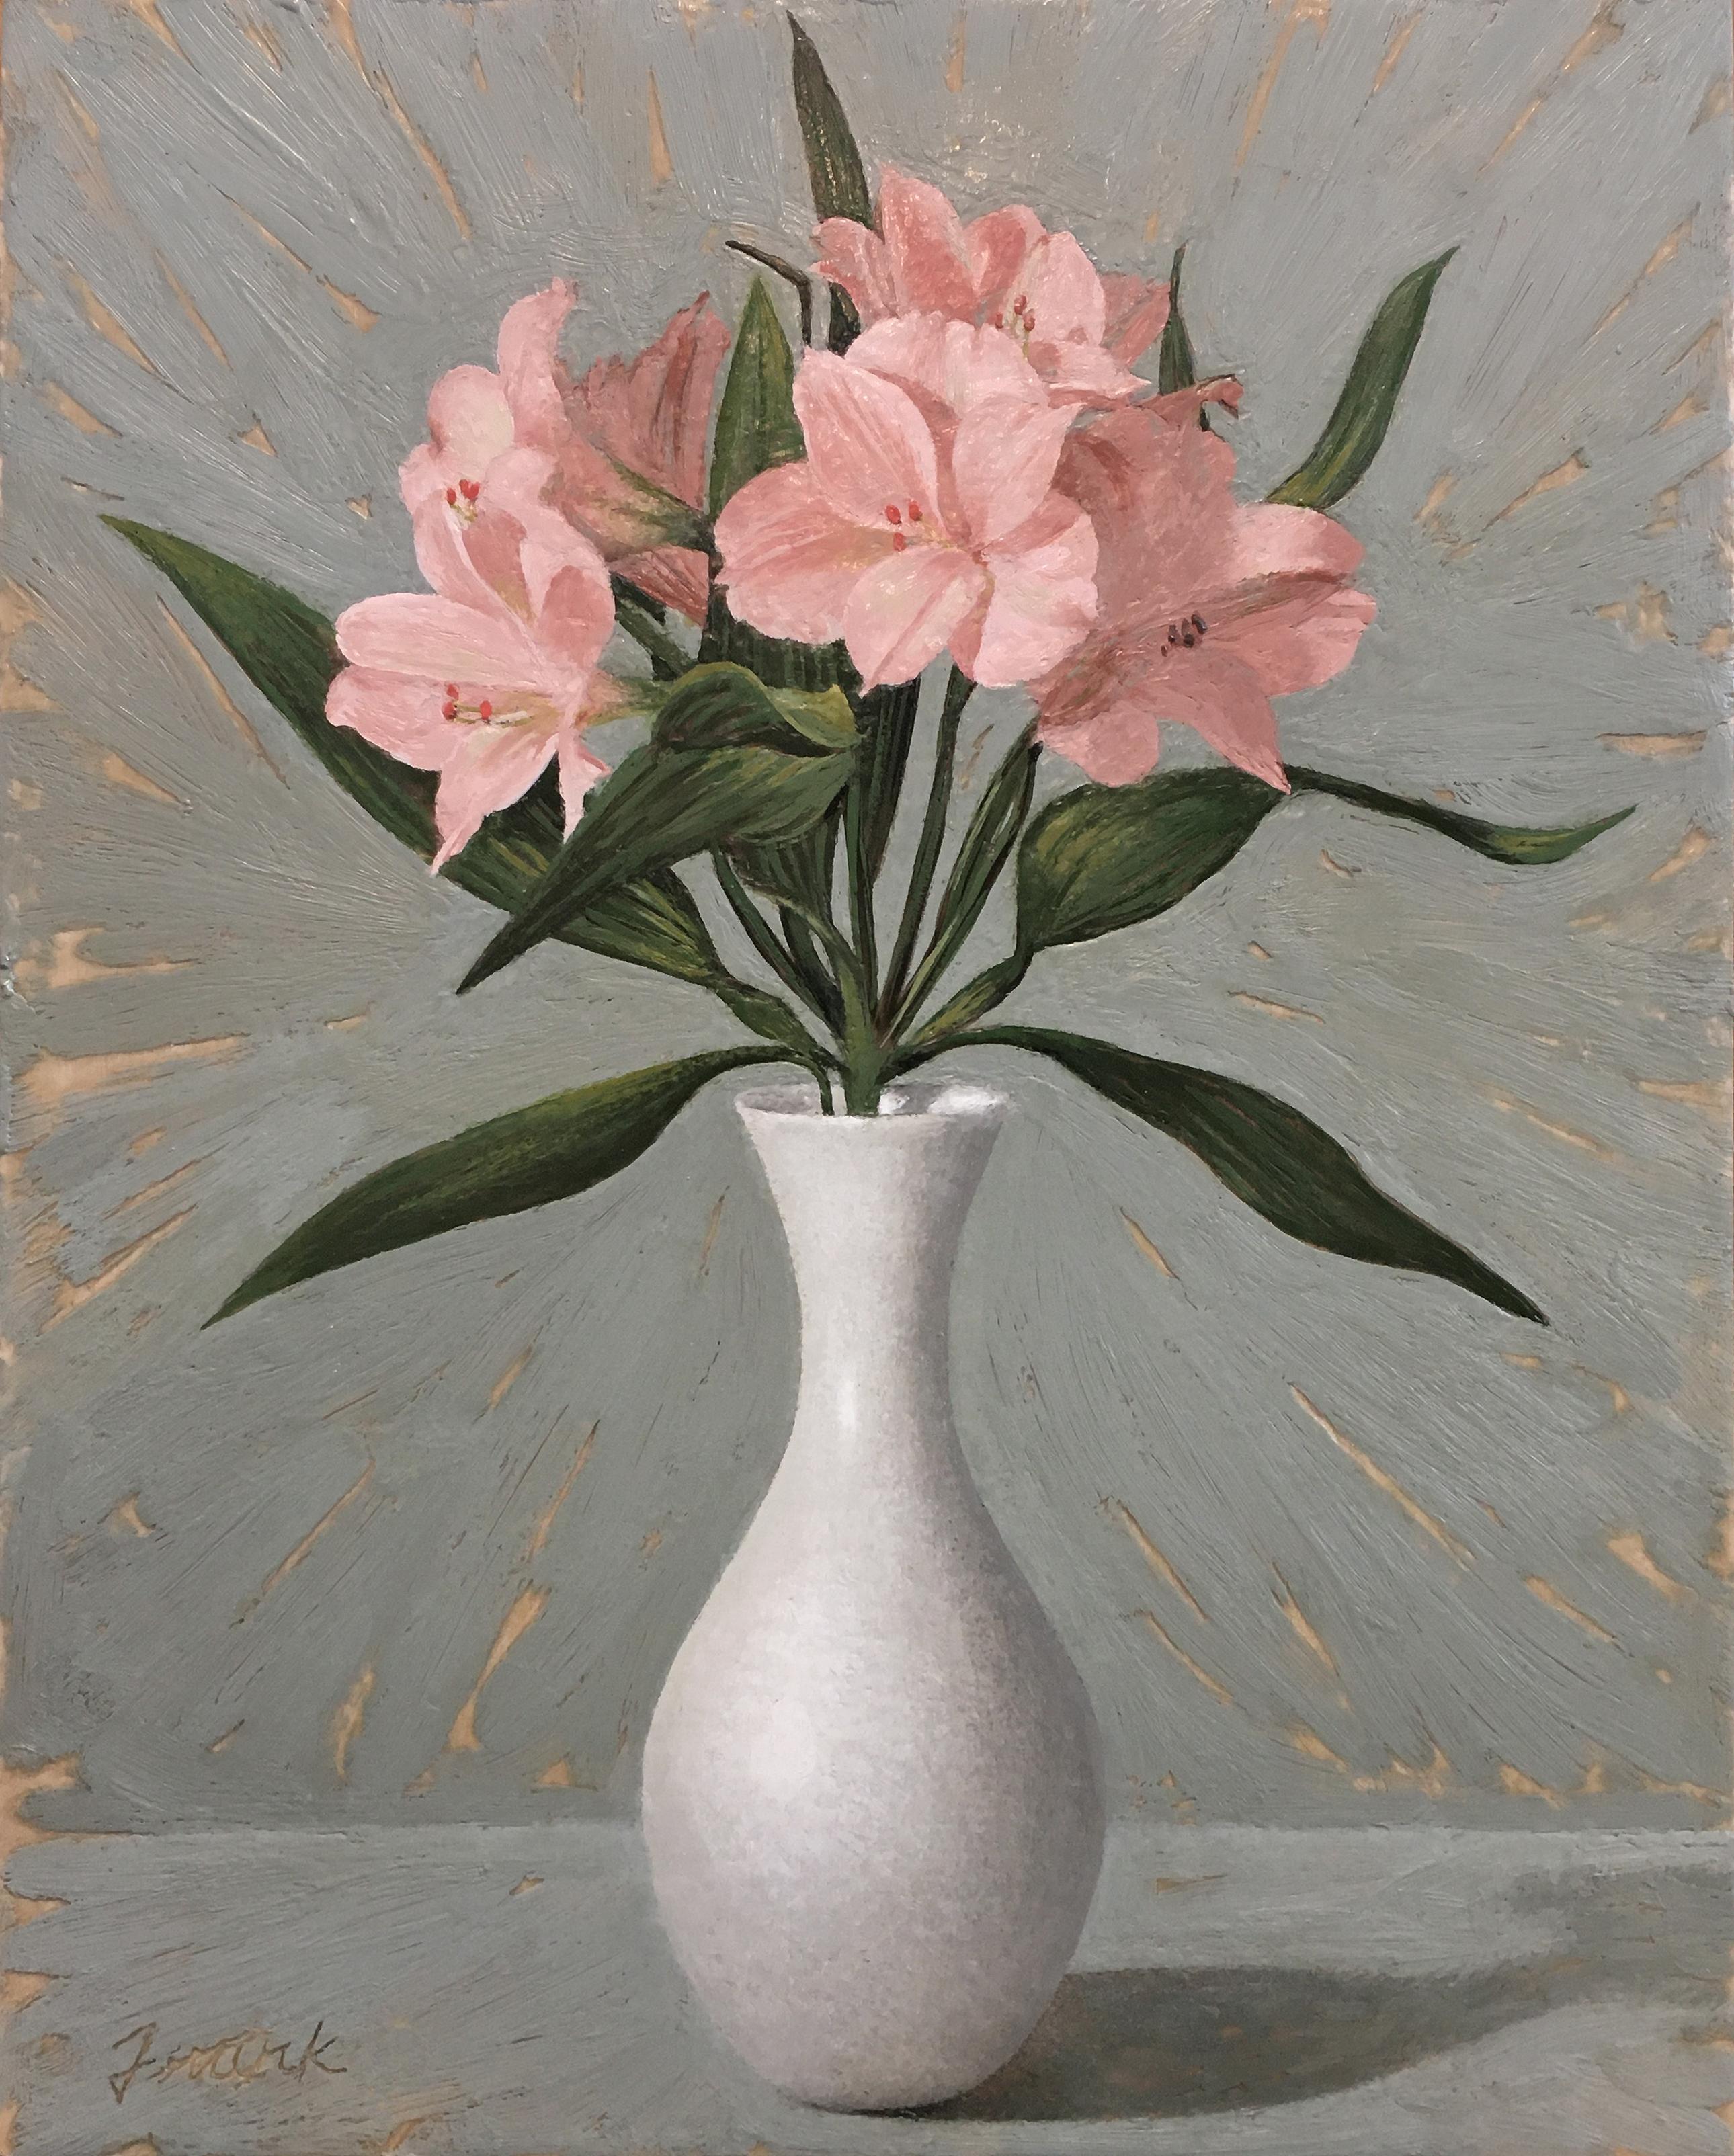 Kevin Frank Figurative Painting - Pink Flowers